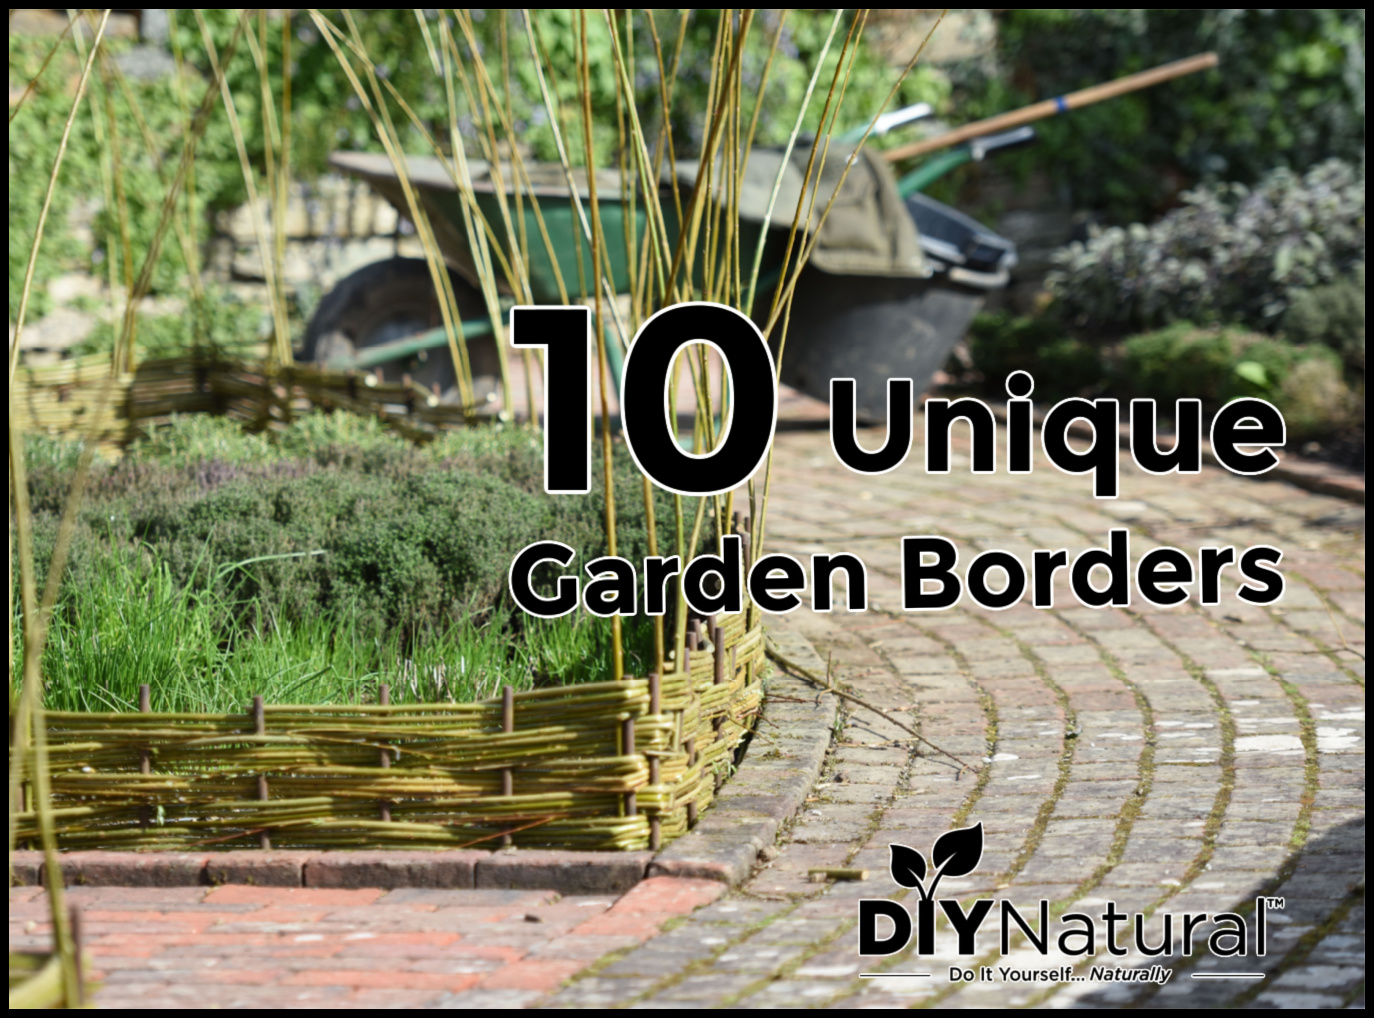 I love my garden but didn’t want garden borders like everyone else so I made this list of 10 unique and fun garden border edging ideas. Enjoy! I bou